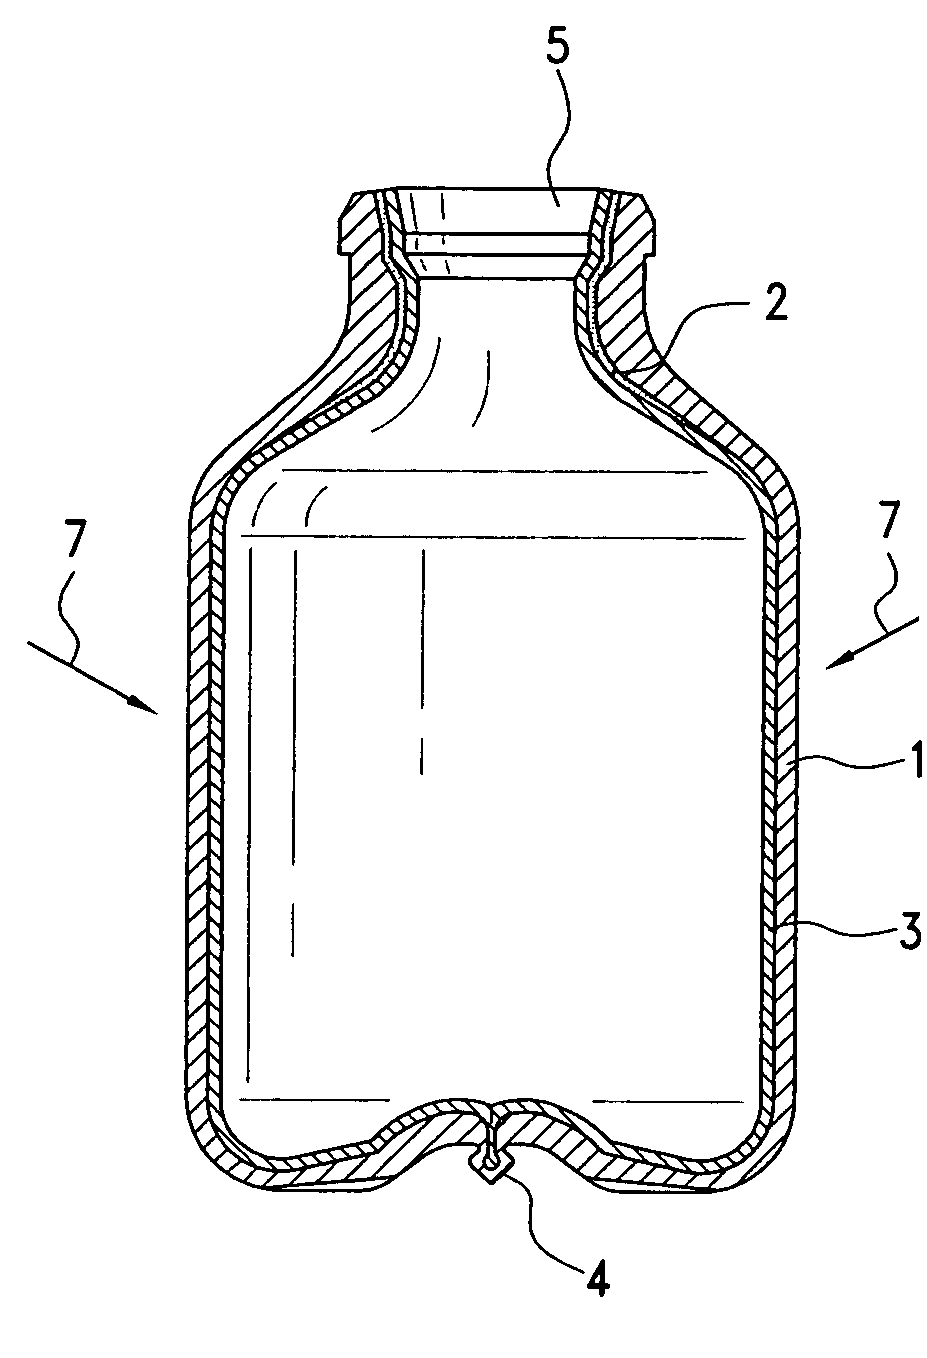 Container comprising an inner pouch